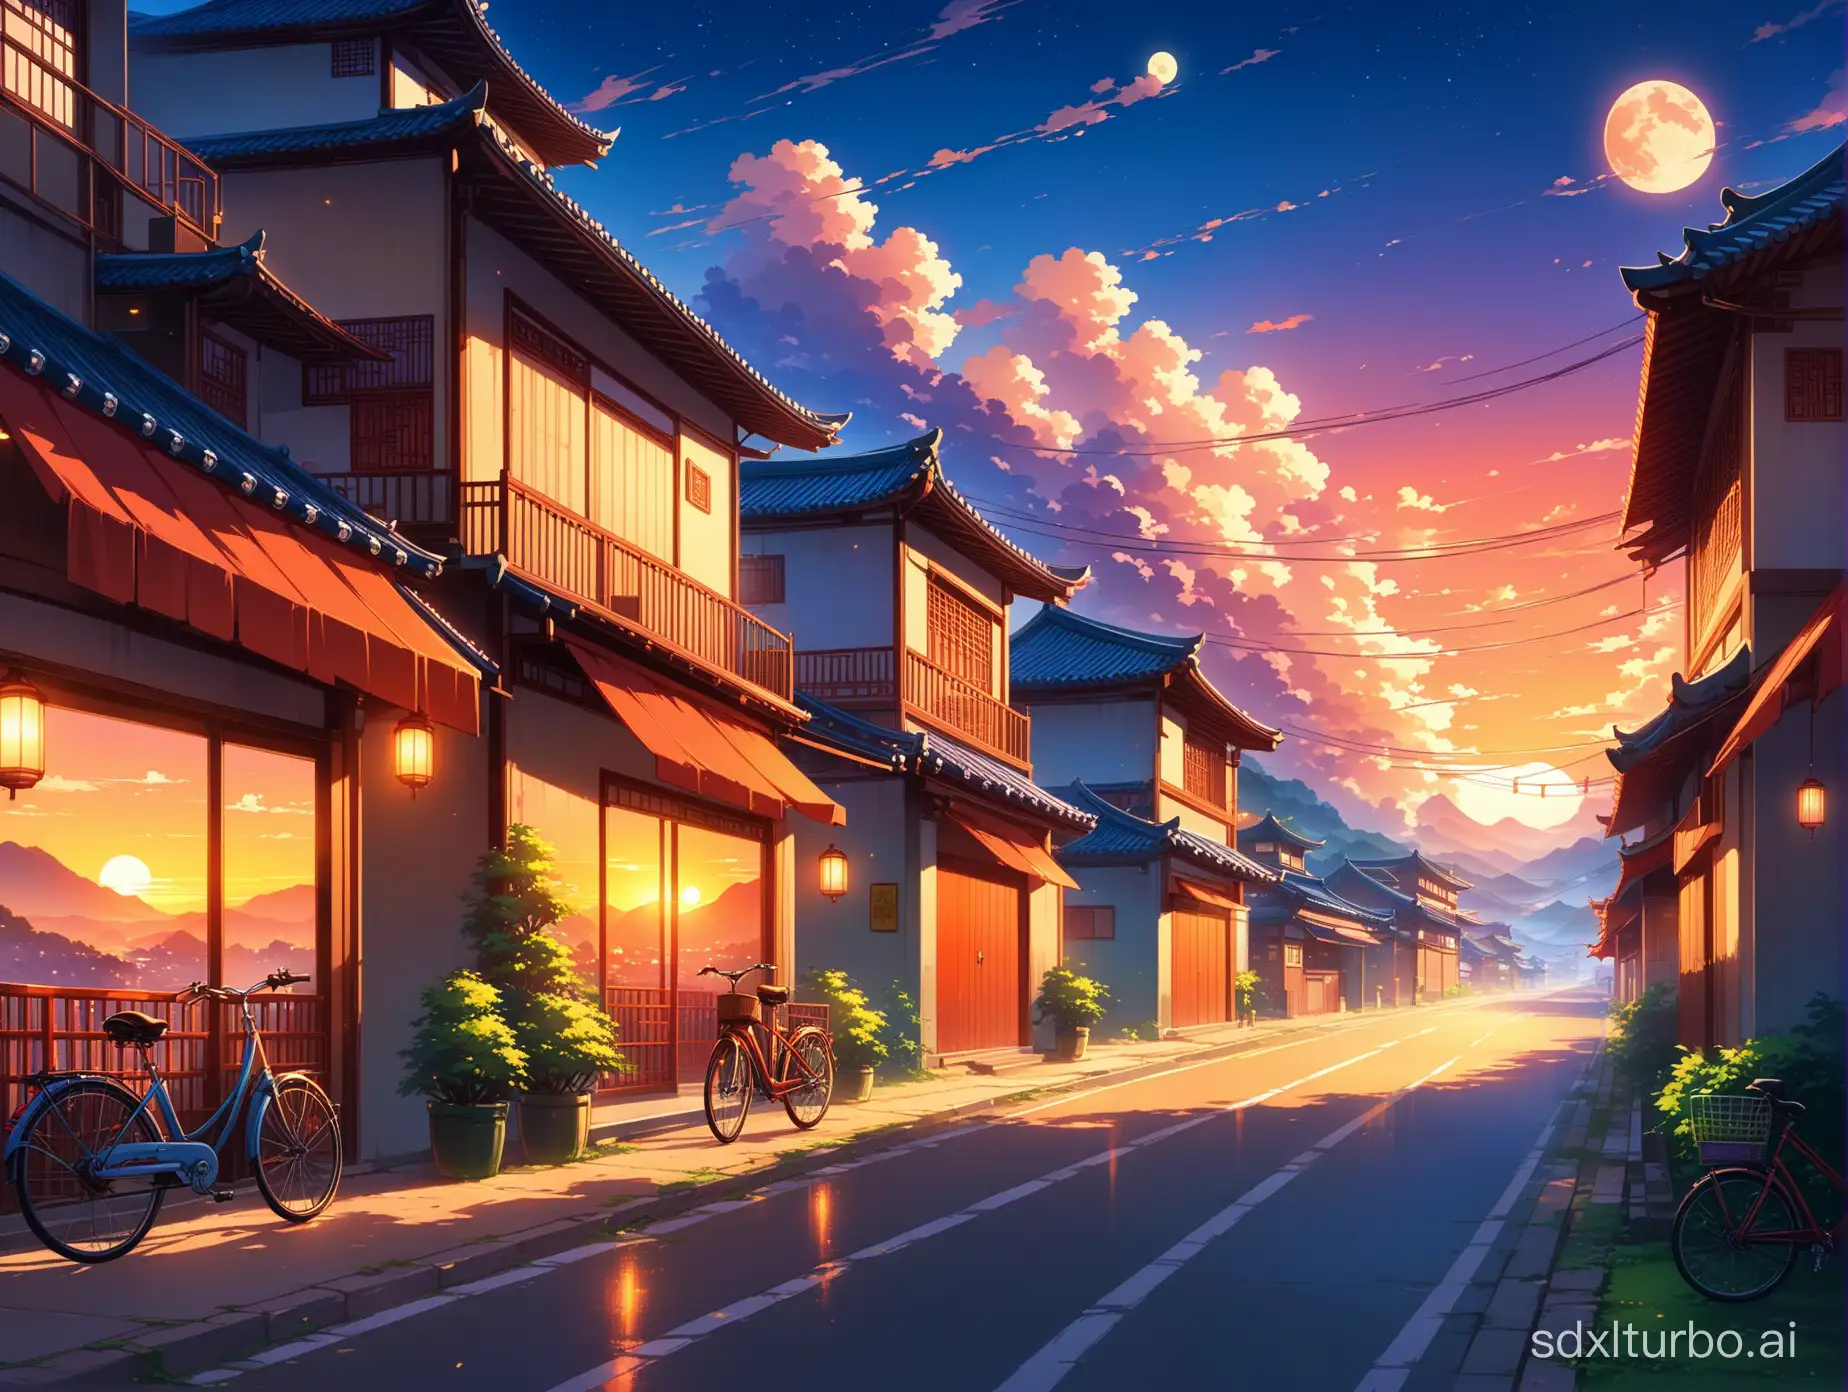 A painting of a street in a southern Chinese town with a bicycle parked on the side of the road, a bright moon in the sky, colorful evening sunsets, anime background art, a beautiful art illustration, beautiful art UHD 4 k, landscape artwork, beautiful digital artwork, anime art wallpaper 4k, anime art wallpapers 4 k, beautiful aesthetic art, beautiful digital paintings, beautiful anime landscapes, stunning wallpapers, via By Beauty, Ross Tran. Landscape background